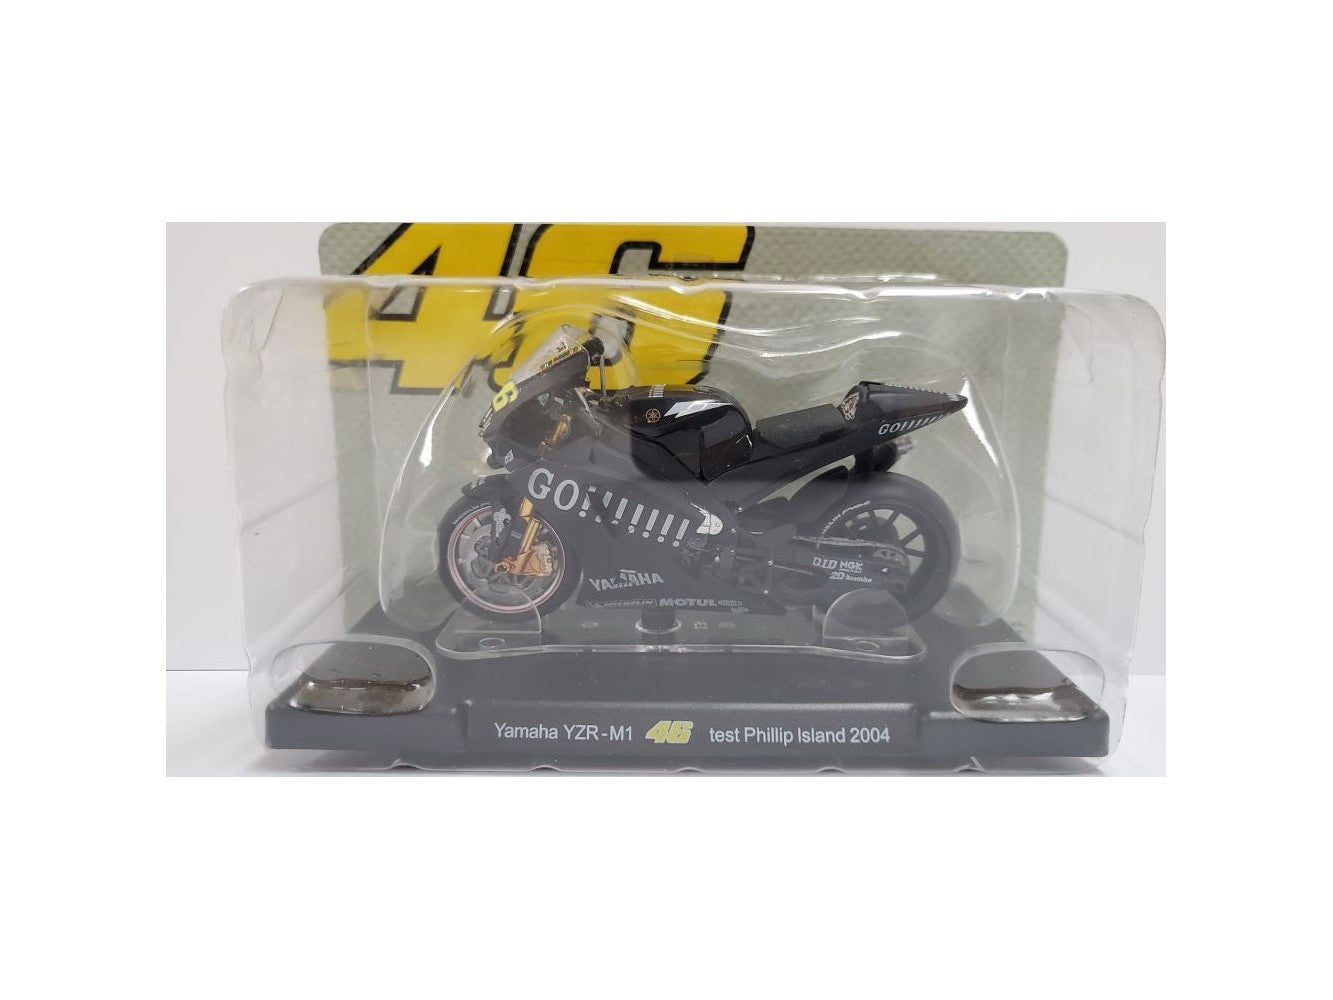 Yamaha YZR-M1 #46 MotoGP Phillip Island Test 2004 Valentino Rossi - 1:18 Scale Diecast Model Motorcycle-Unbranded-Diecast Model Centre